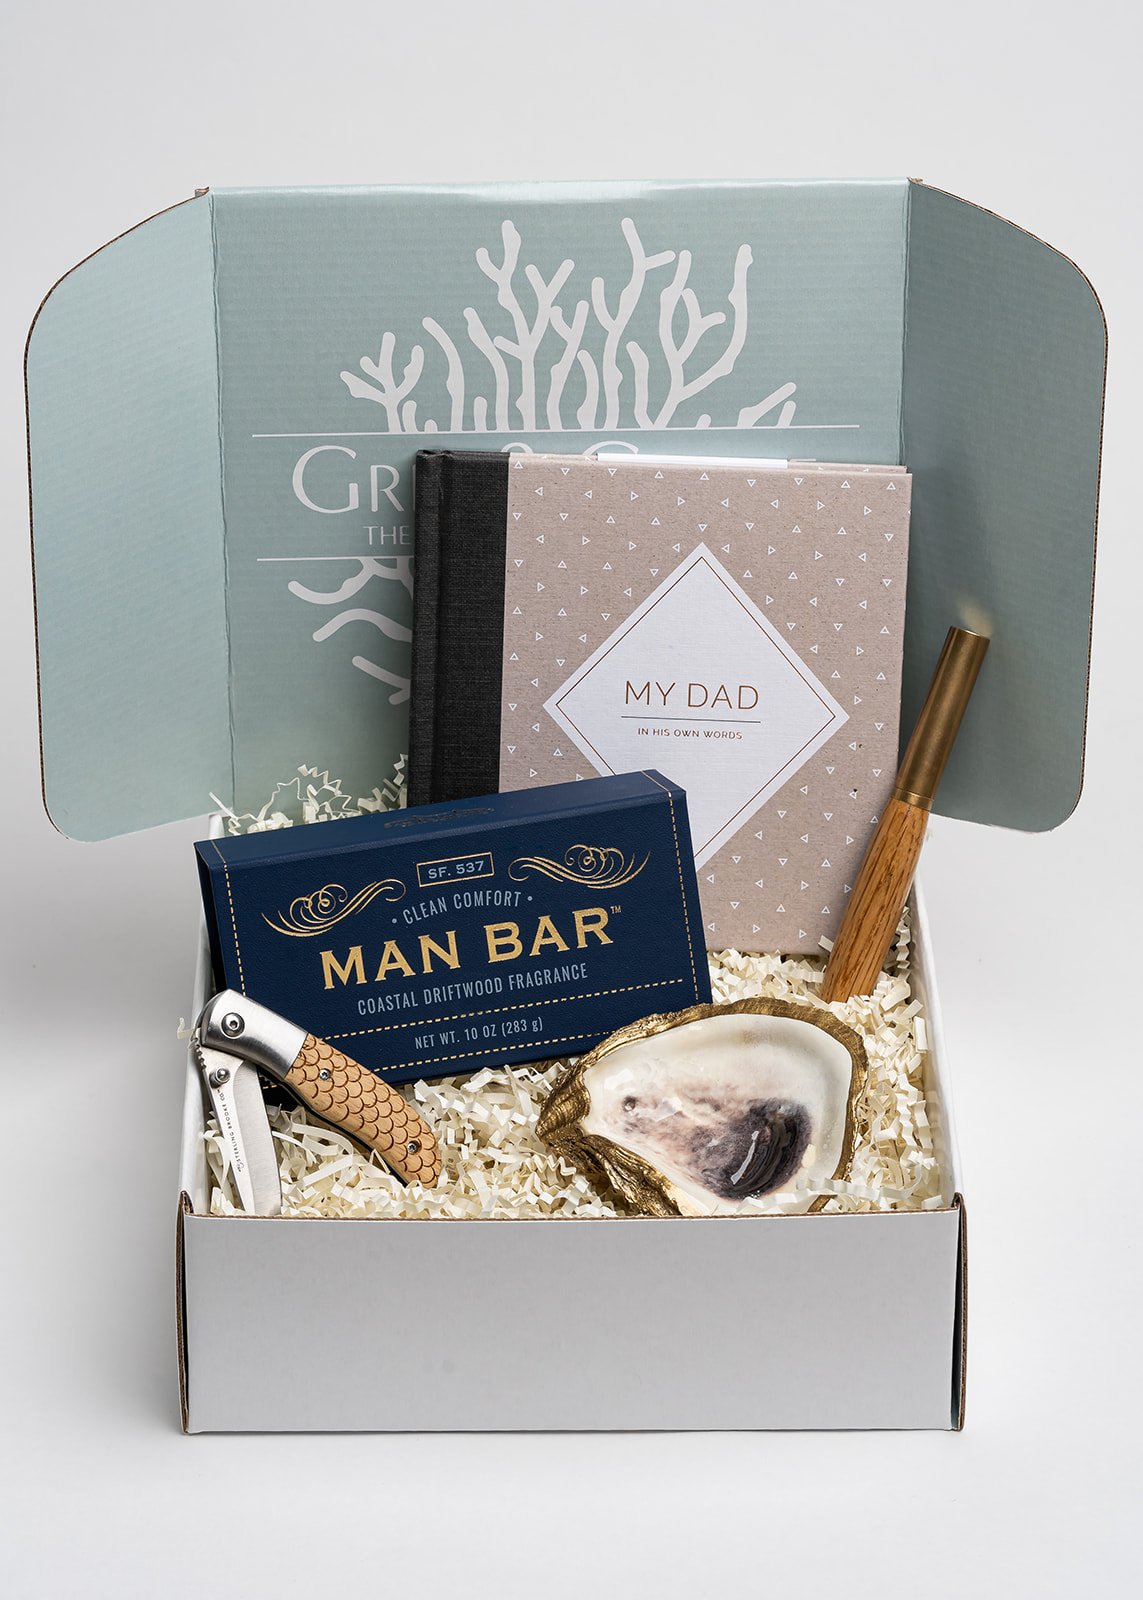 It Takes A Special Man To Be A Dad Gift Box